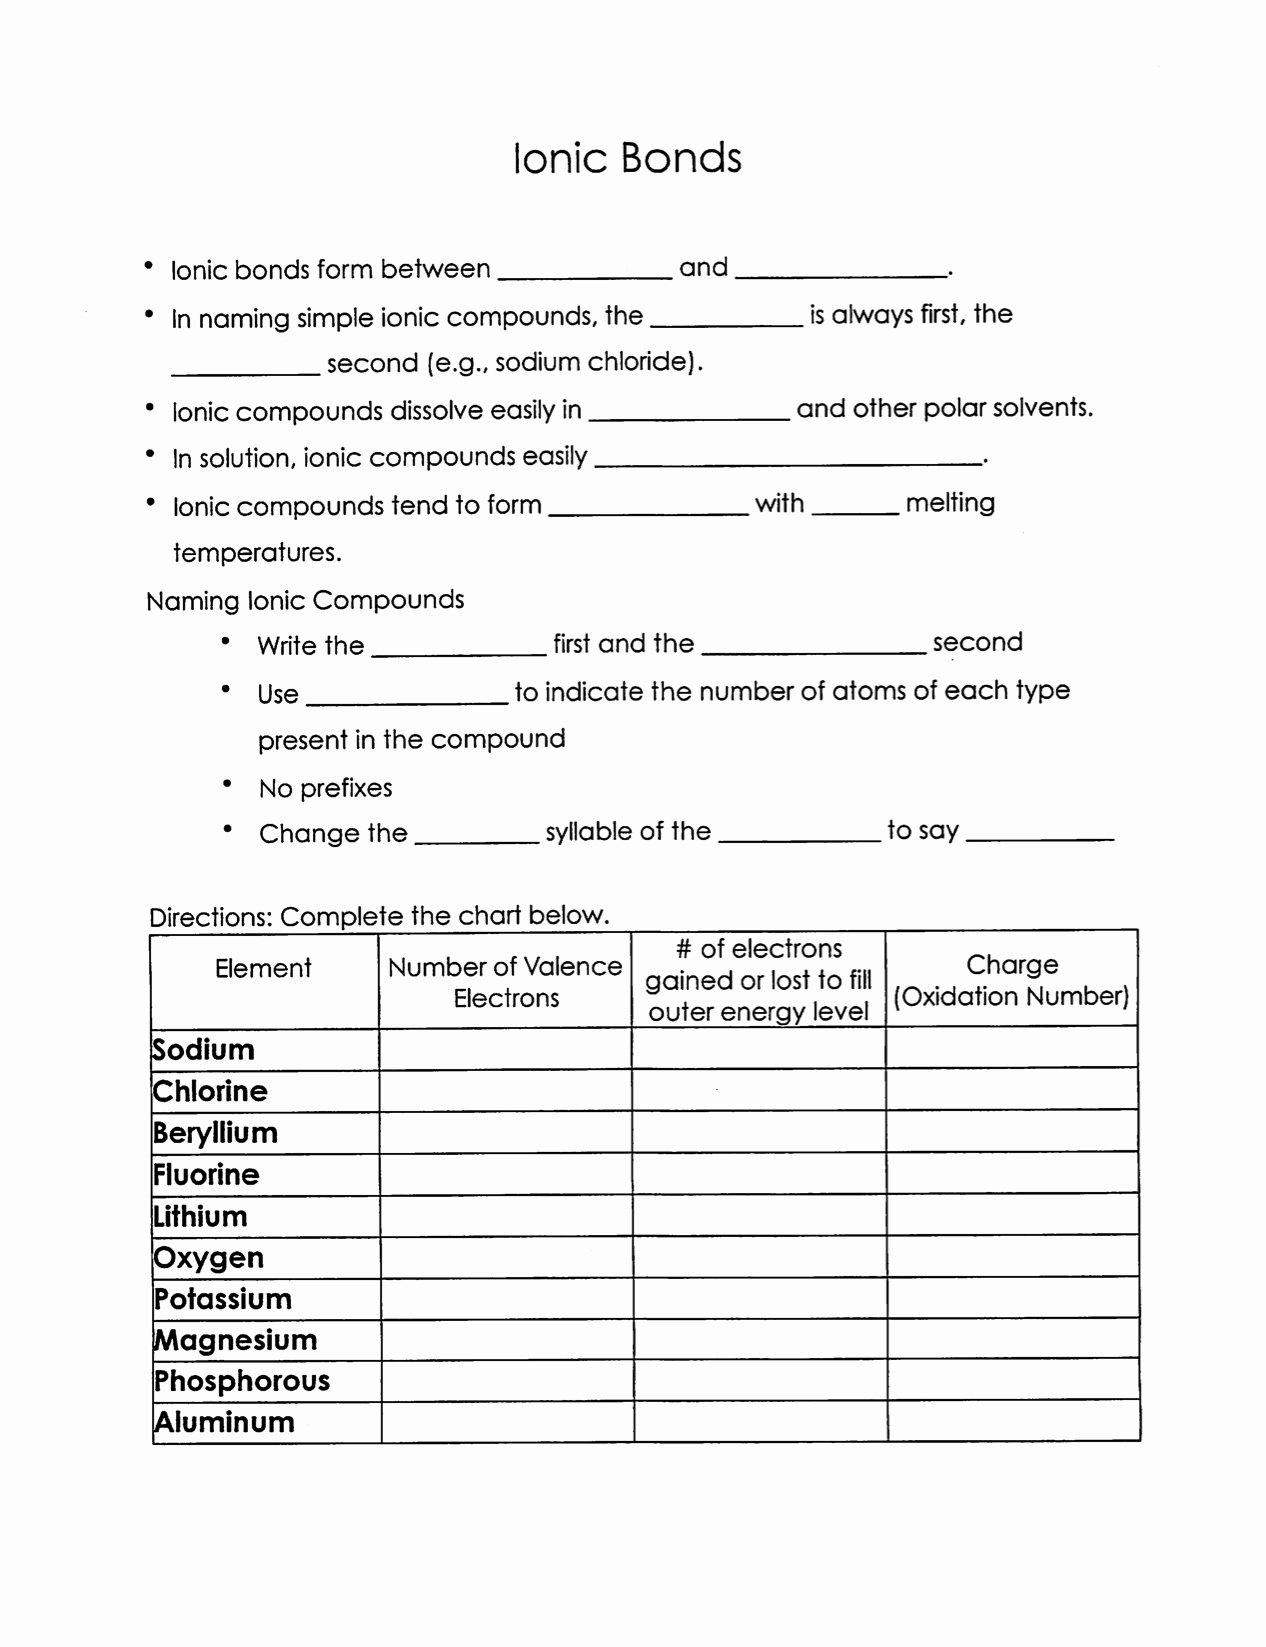 Ionic and Covalent Bonds Worksheet Awesome Christopher White Warren County Public Schools